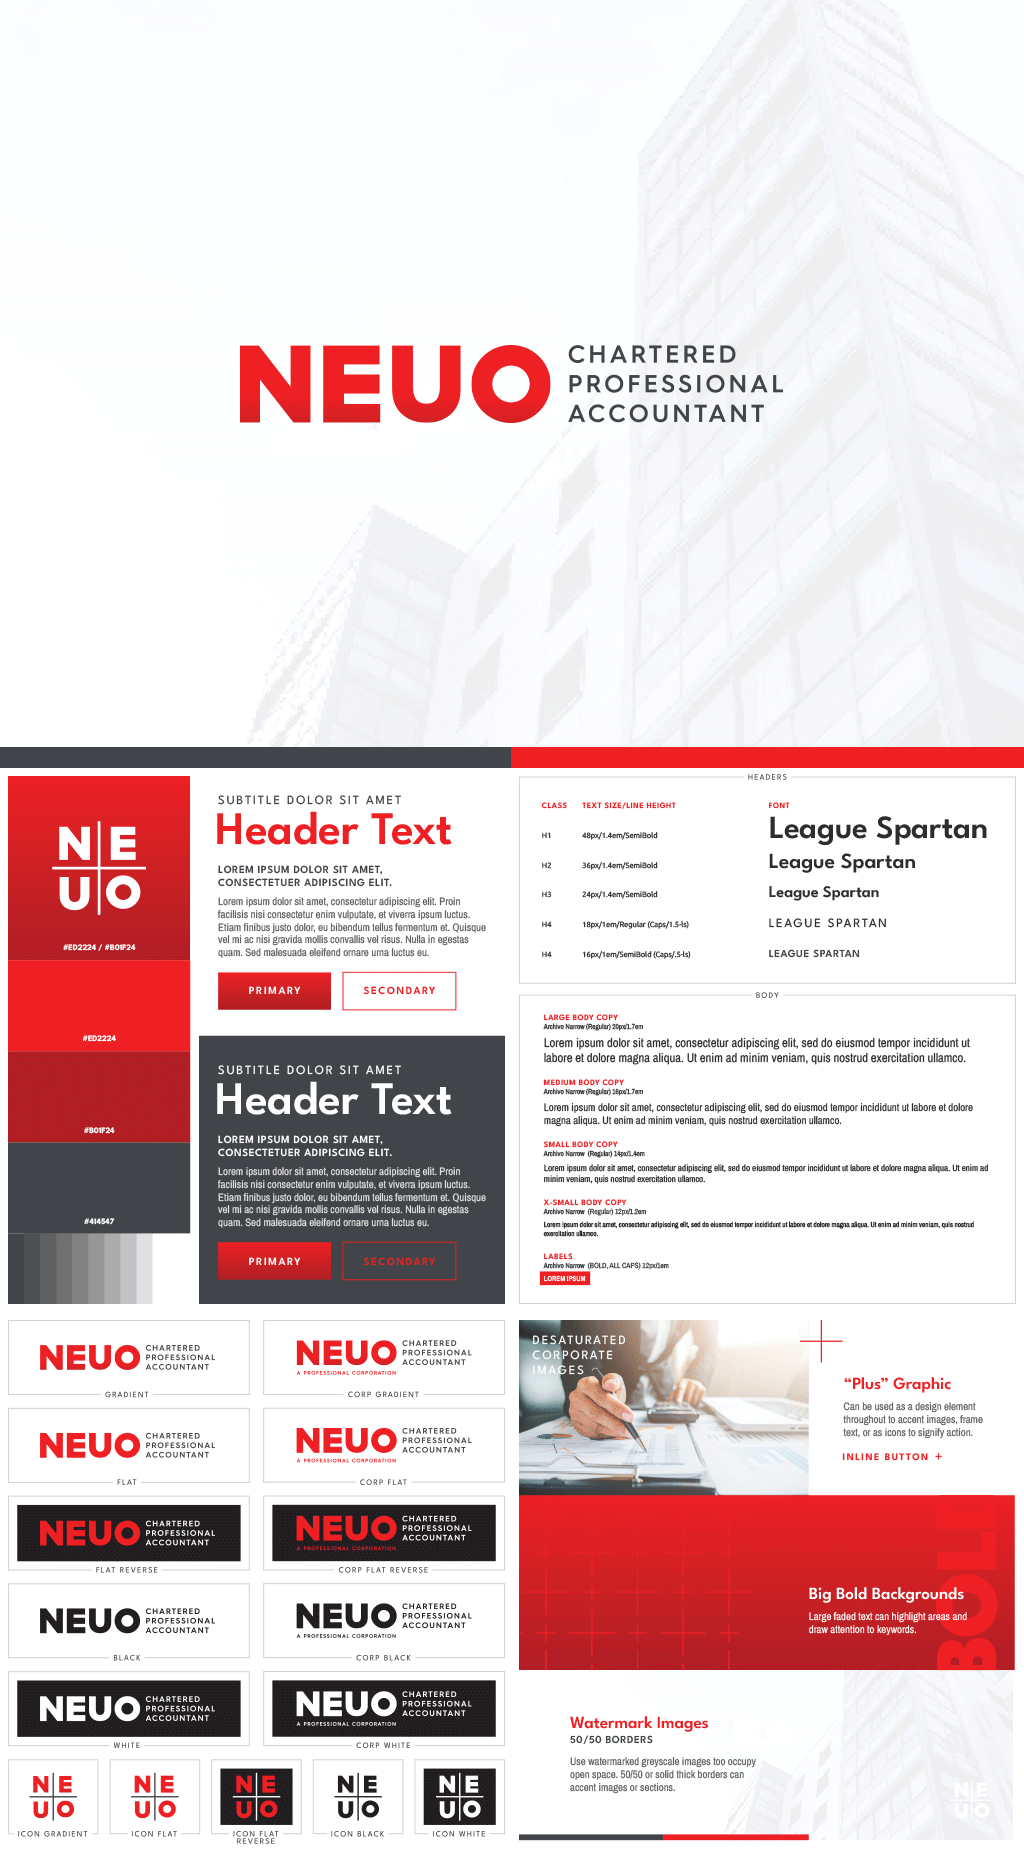 Neuo is one of our Cornwall marketing agency clients with this visual brand design project